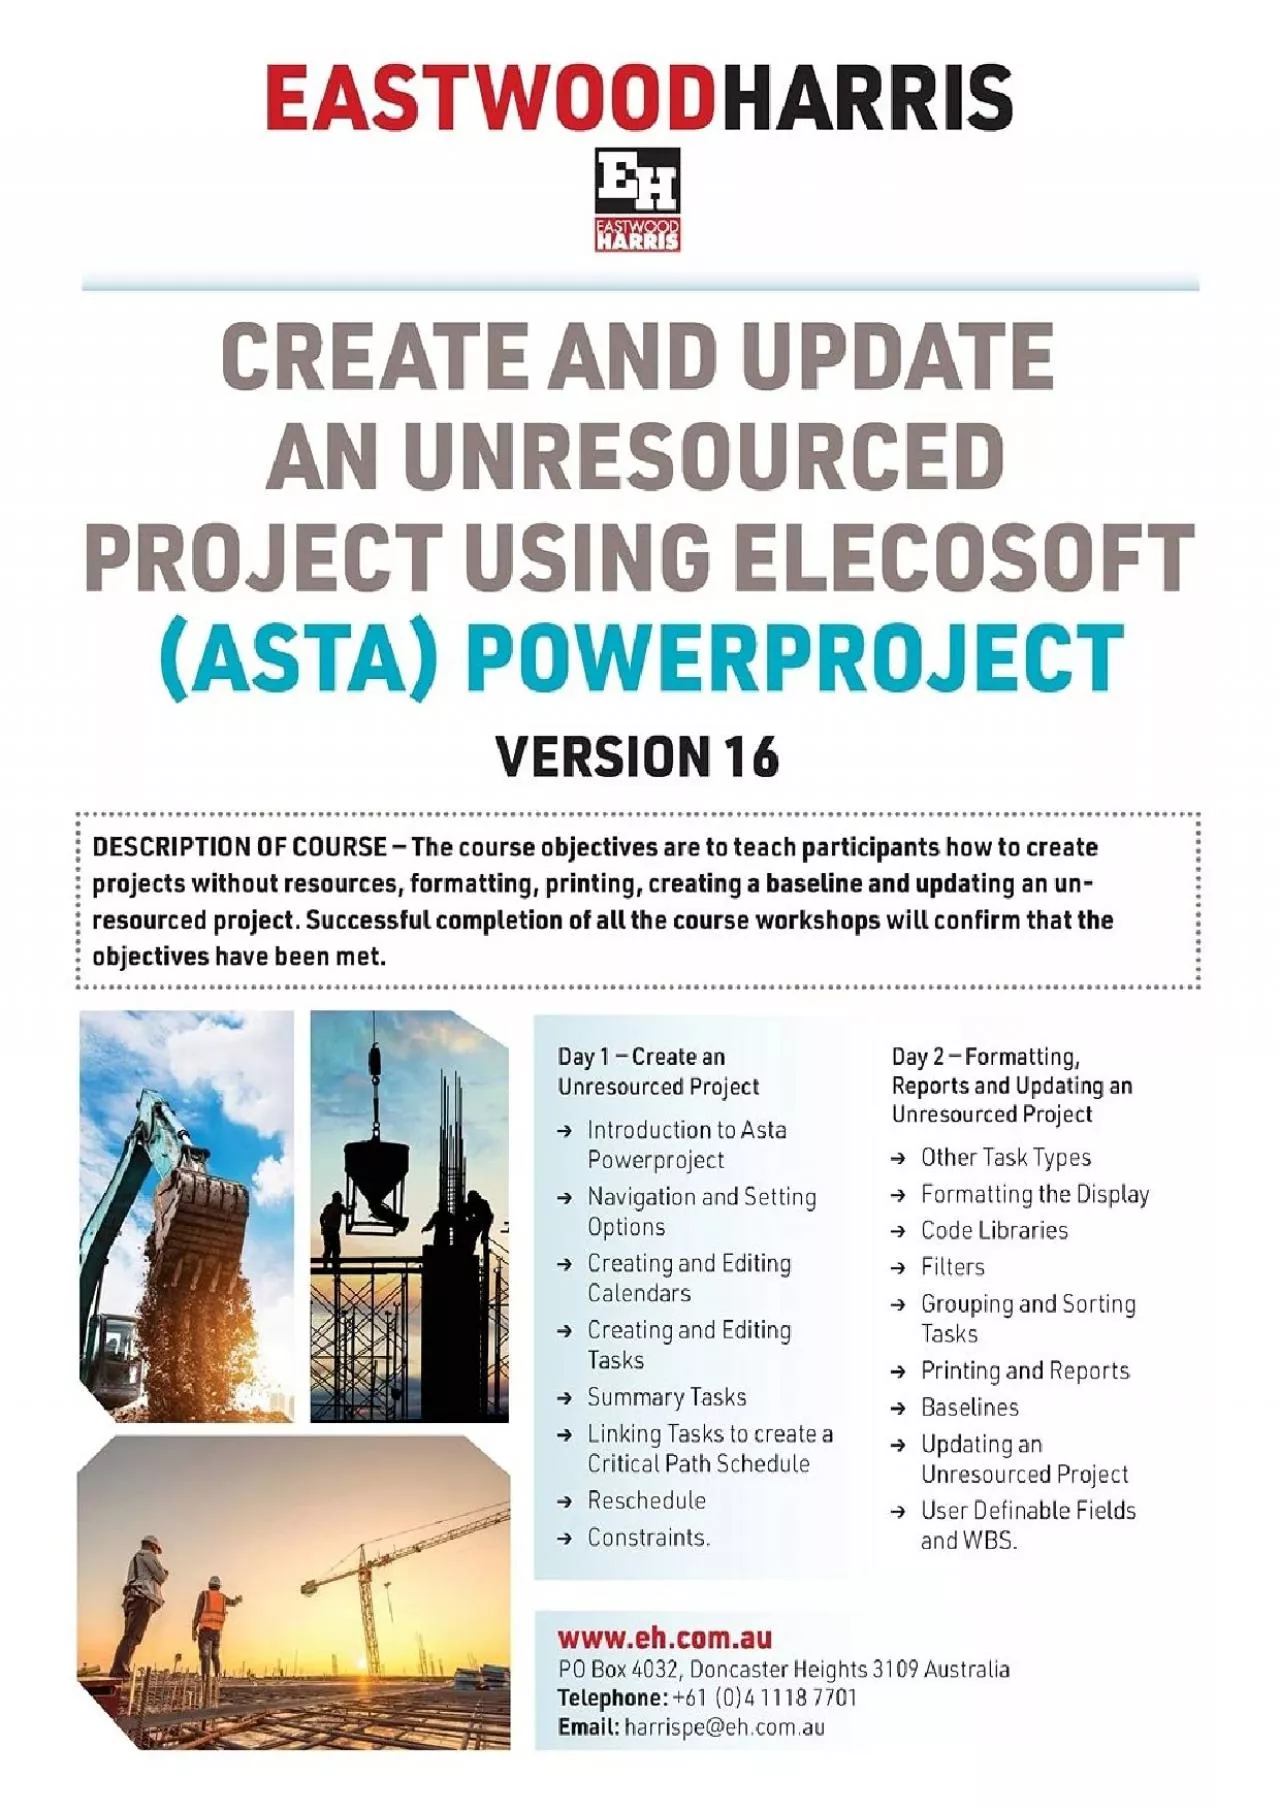 (EBOOK)-Create and Update an Unresourced Project using Elecosoft (Asta) Powerproject Version